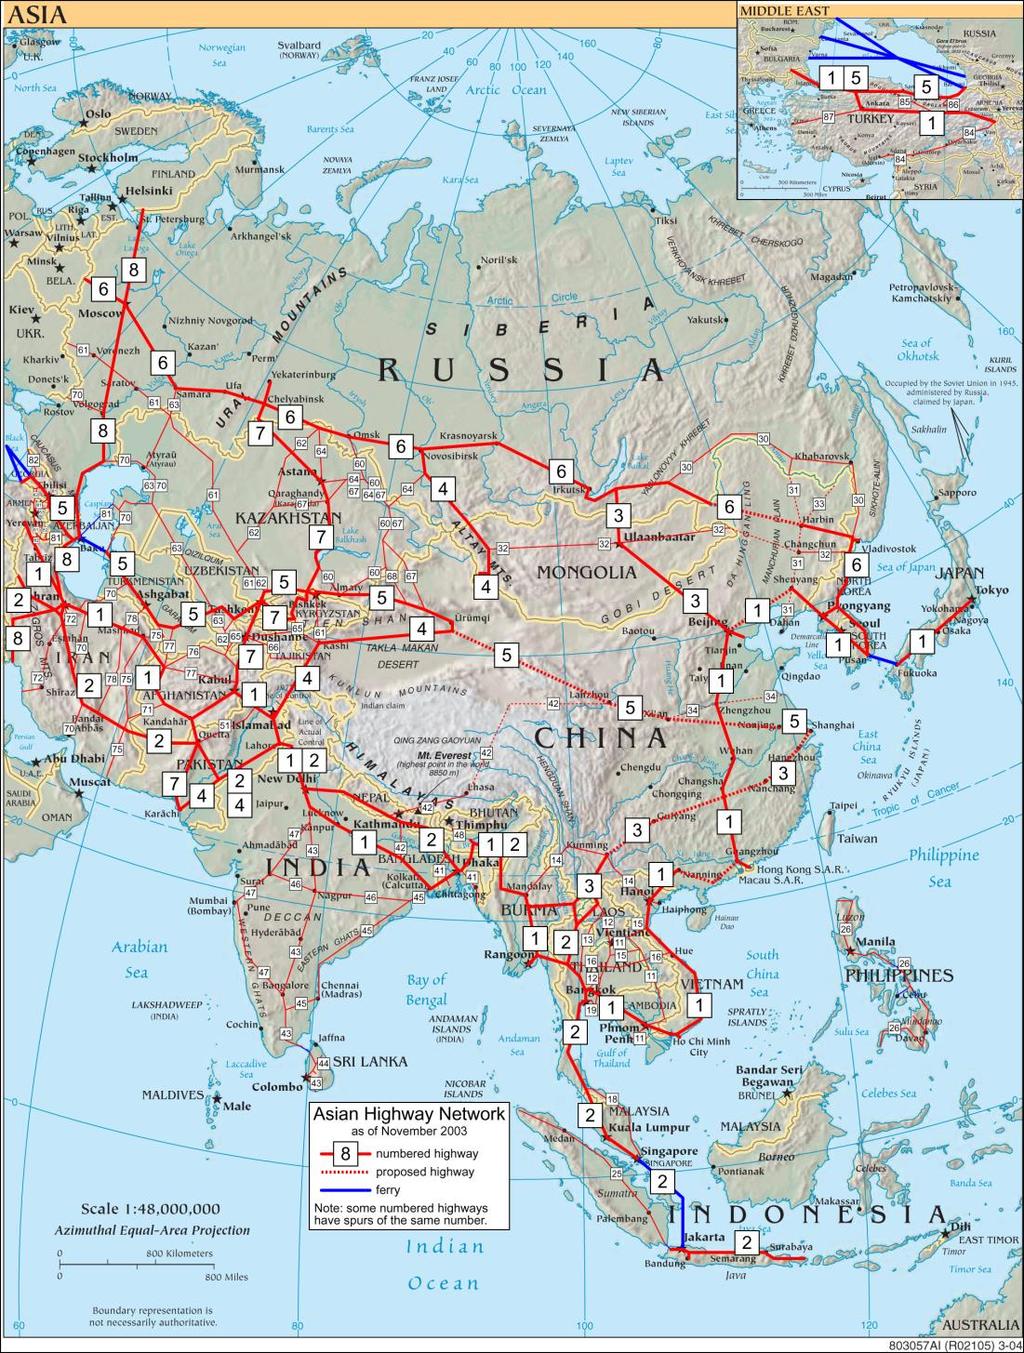 Asian Highways - Summary Agreement by 32 countries Total 140,000 km